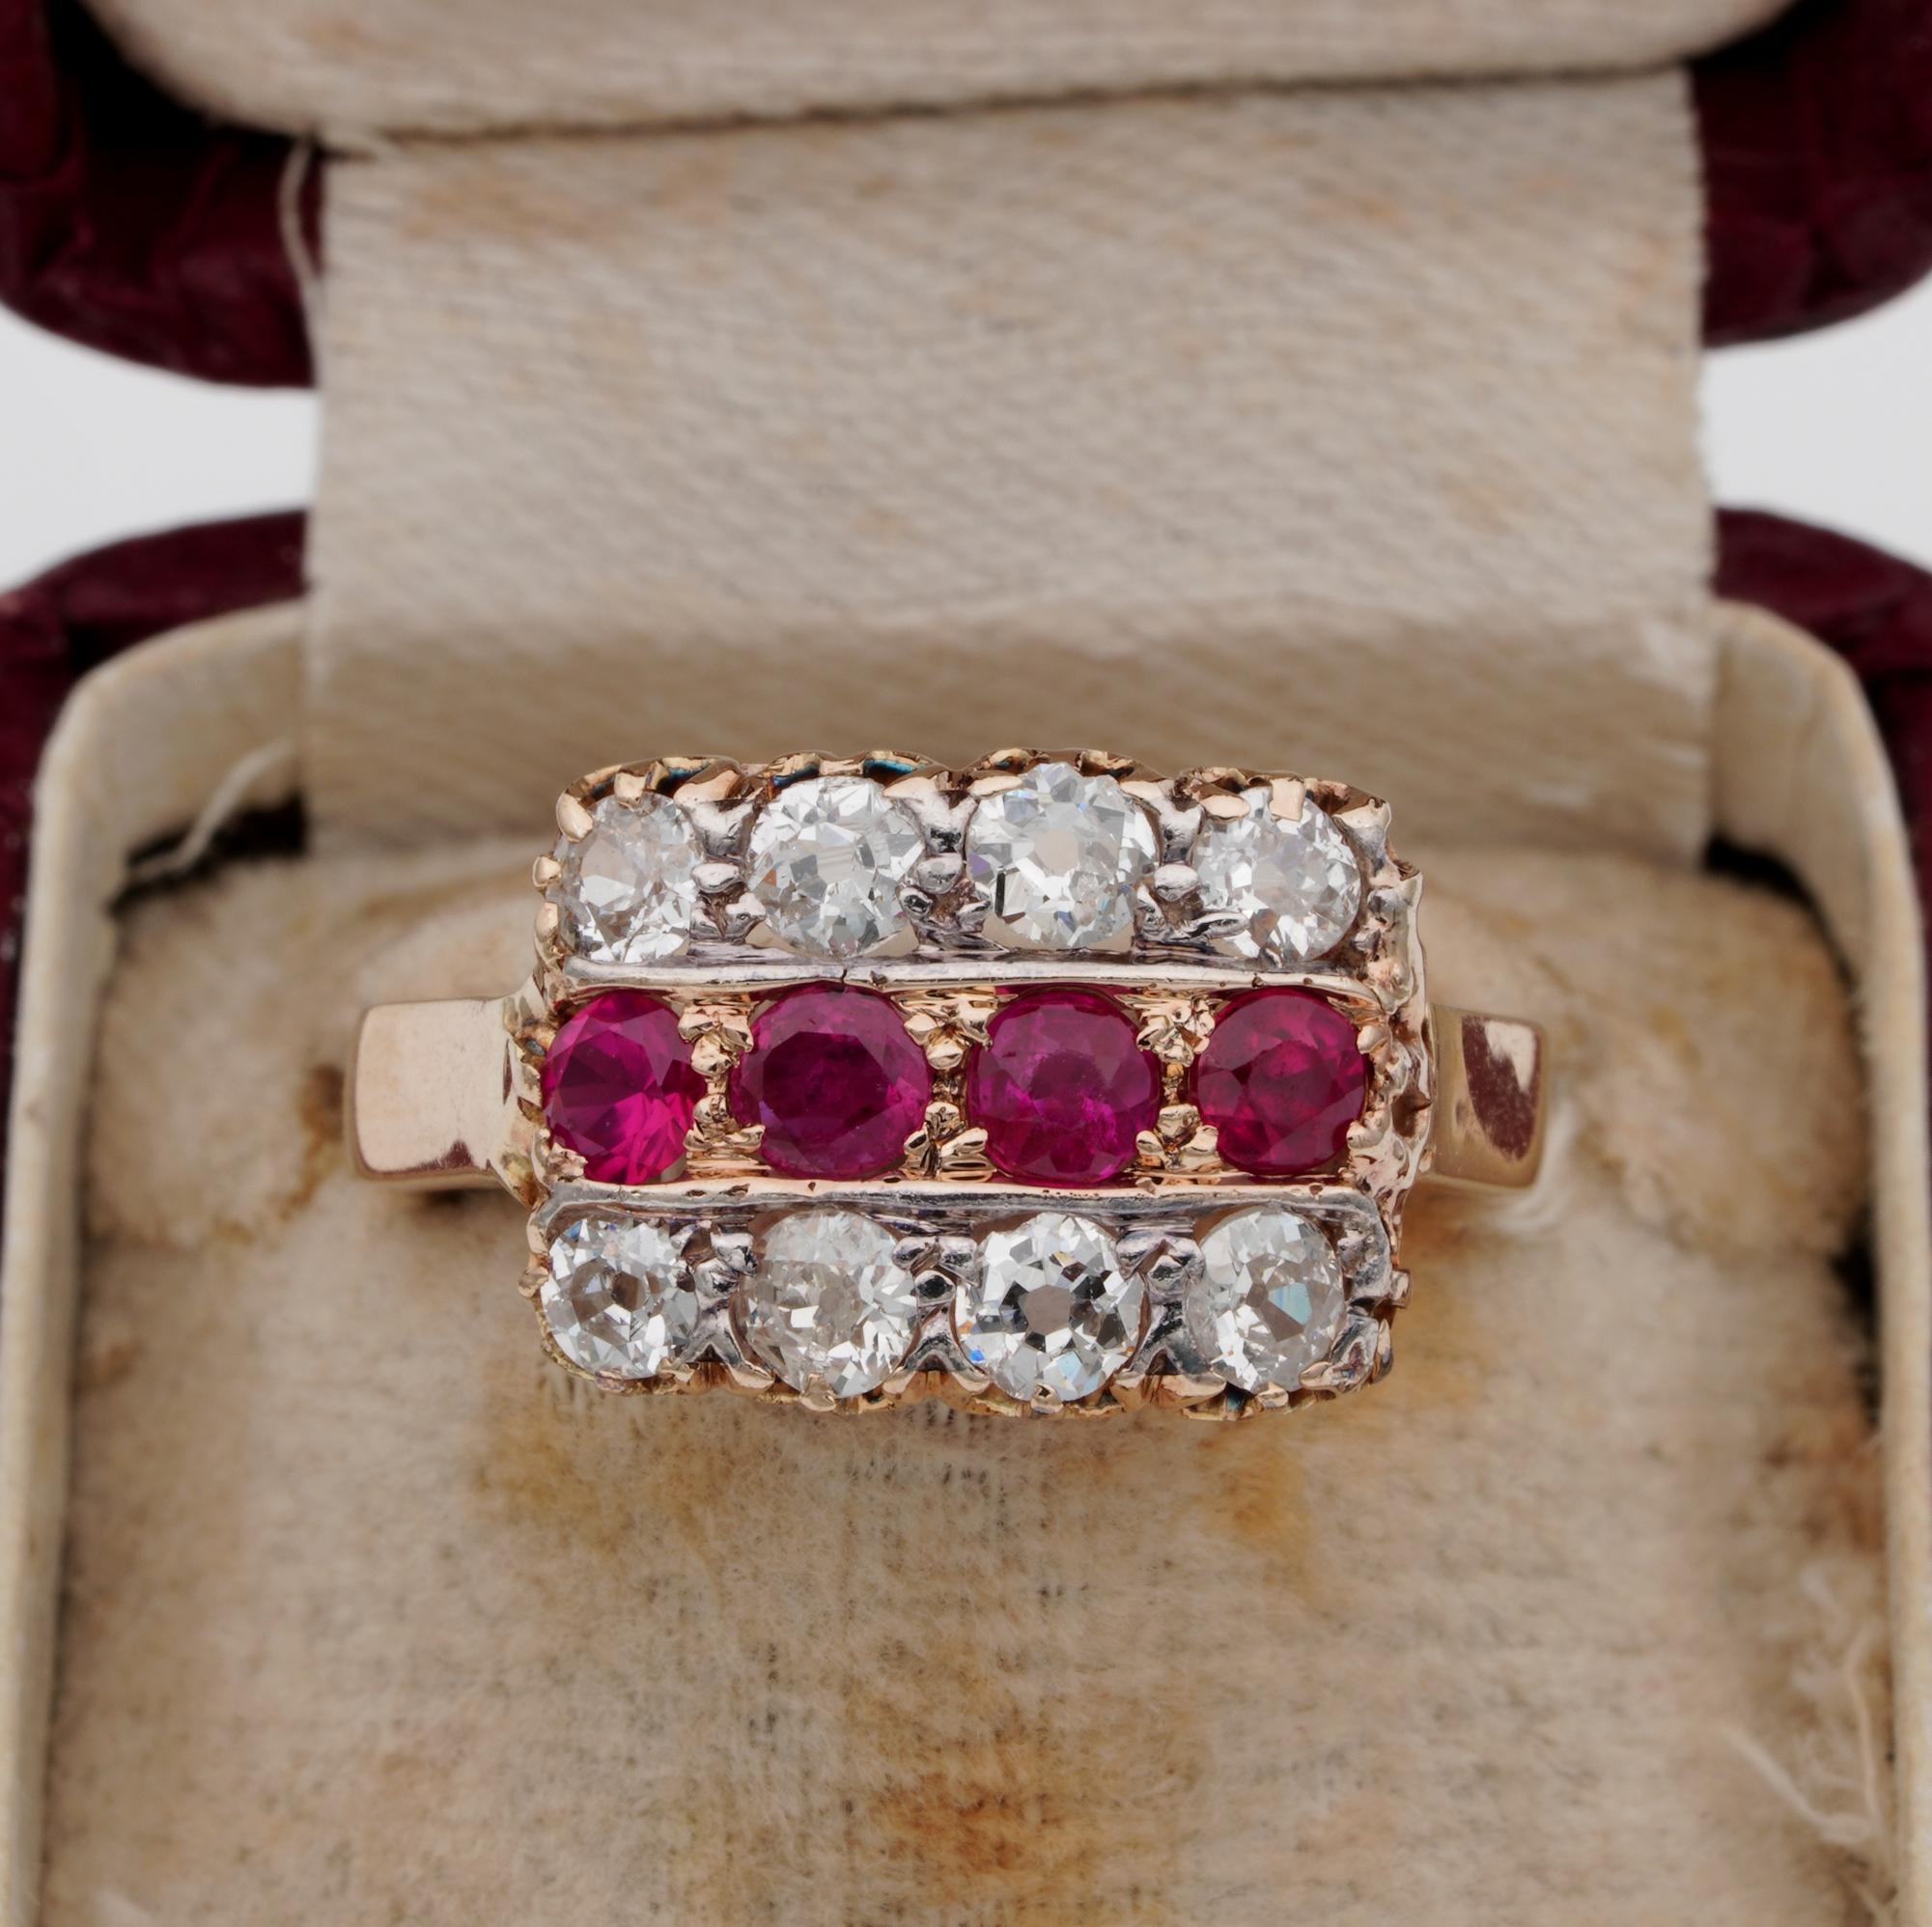 Gorgeous!

A Charming rectangular shaped rich of the finest old cut Diamonds and rare Red Pigeon Blood quality Natural Rubies remark the crown of this original Victorian ring
Ring is from 1900 ca all superiorly hand crafted of solid 18 KT rose gold